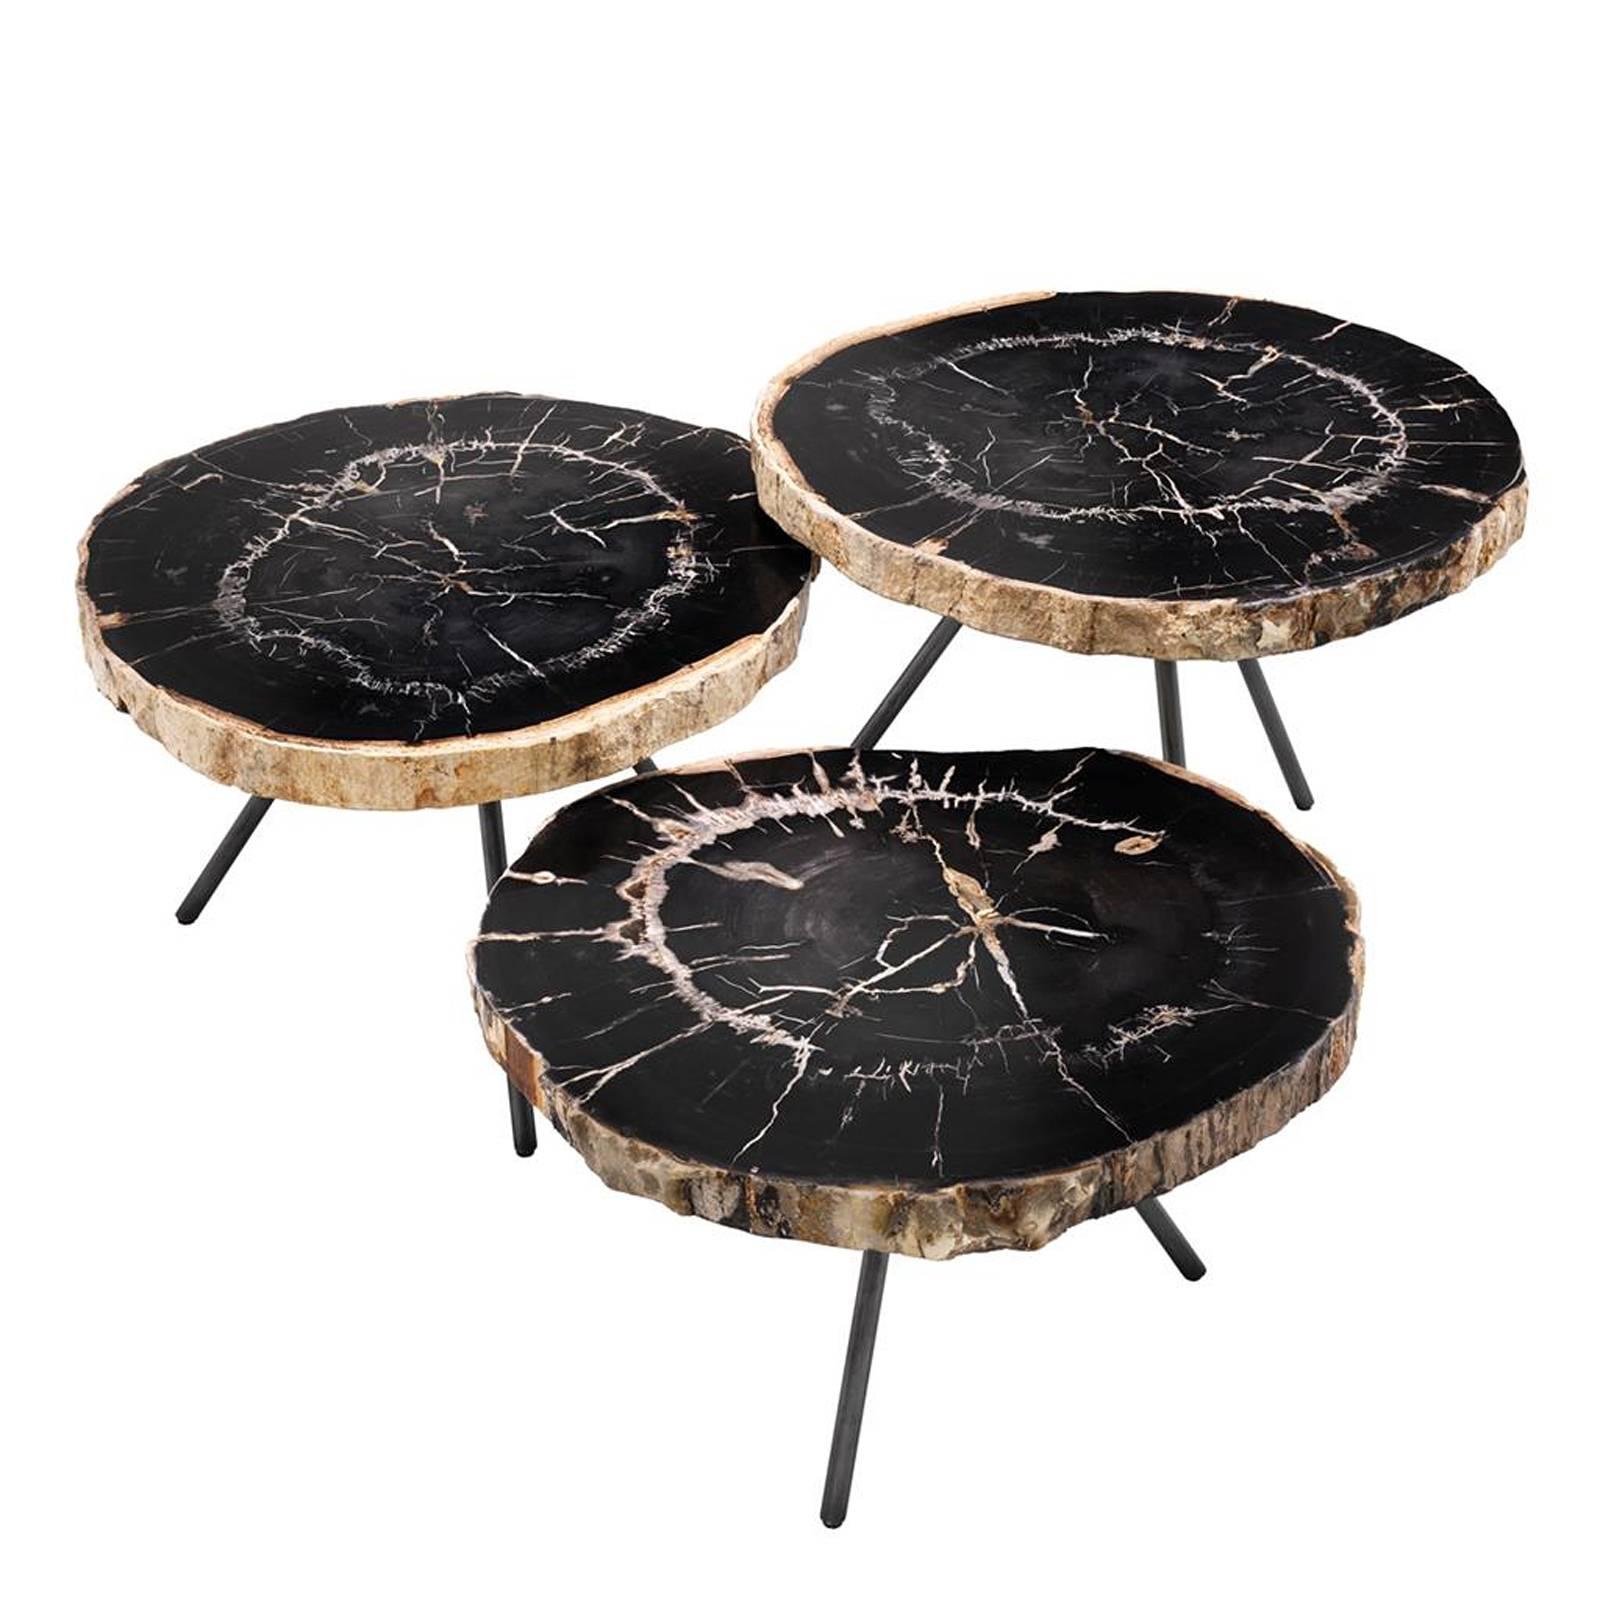 Coffee Table Petrified Wood Dark Slices Set of 3.
On bronze finish base. Each top is unique and
exceptional piece from Indonesia.
Measure: 
A/L 64 x D 50 x H 50 cm.
B/L 64 x D 50 x H 43cm.
C/L 64 x D 50 x H 36 cm.
  